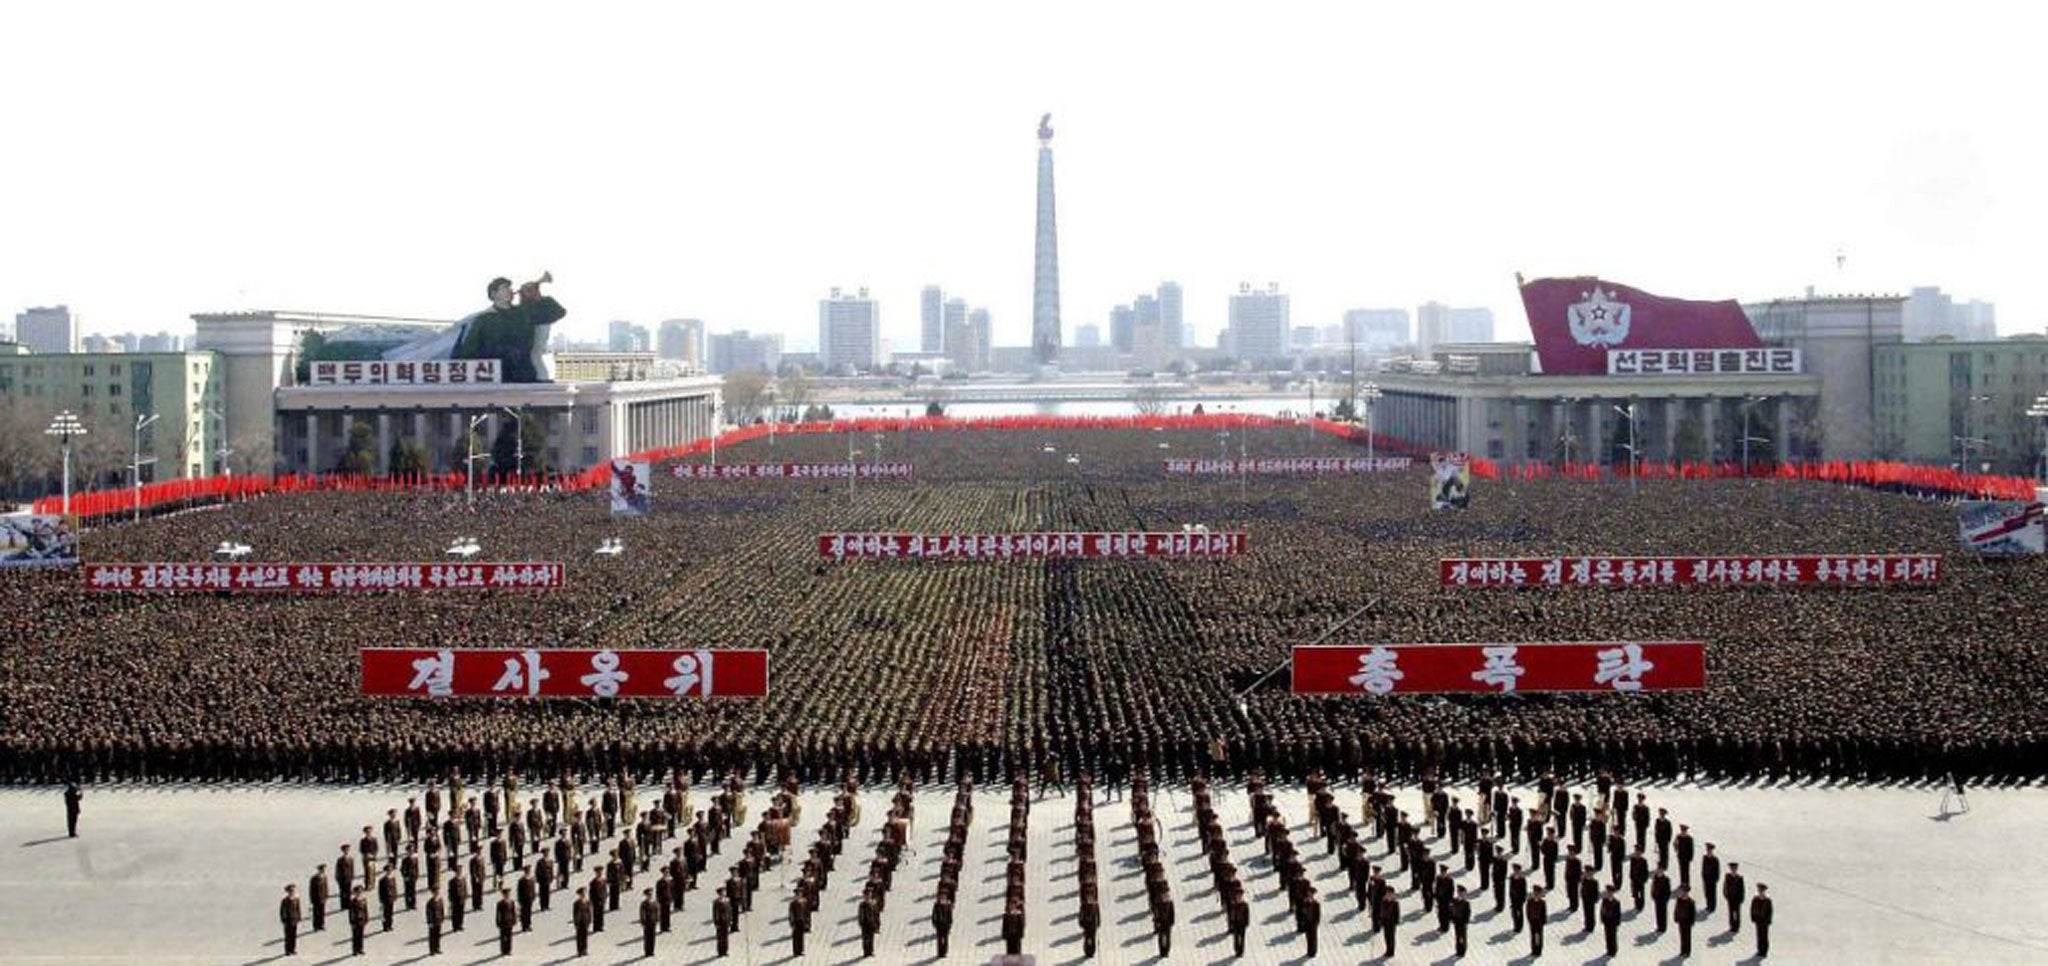 This photo released by North Korea shows a gathering at Kim Il Sung Square in Pyongyang